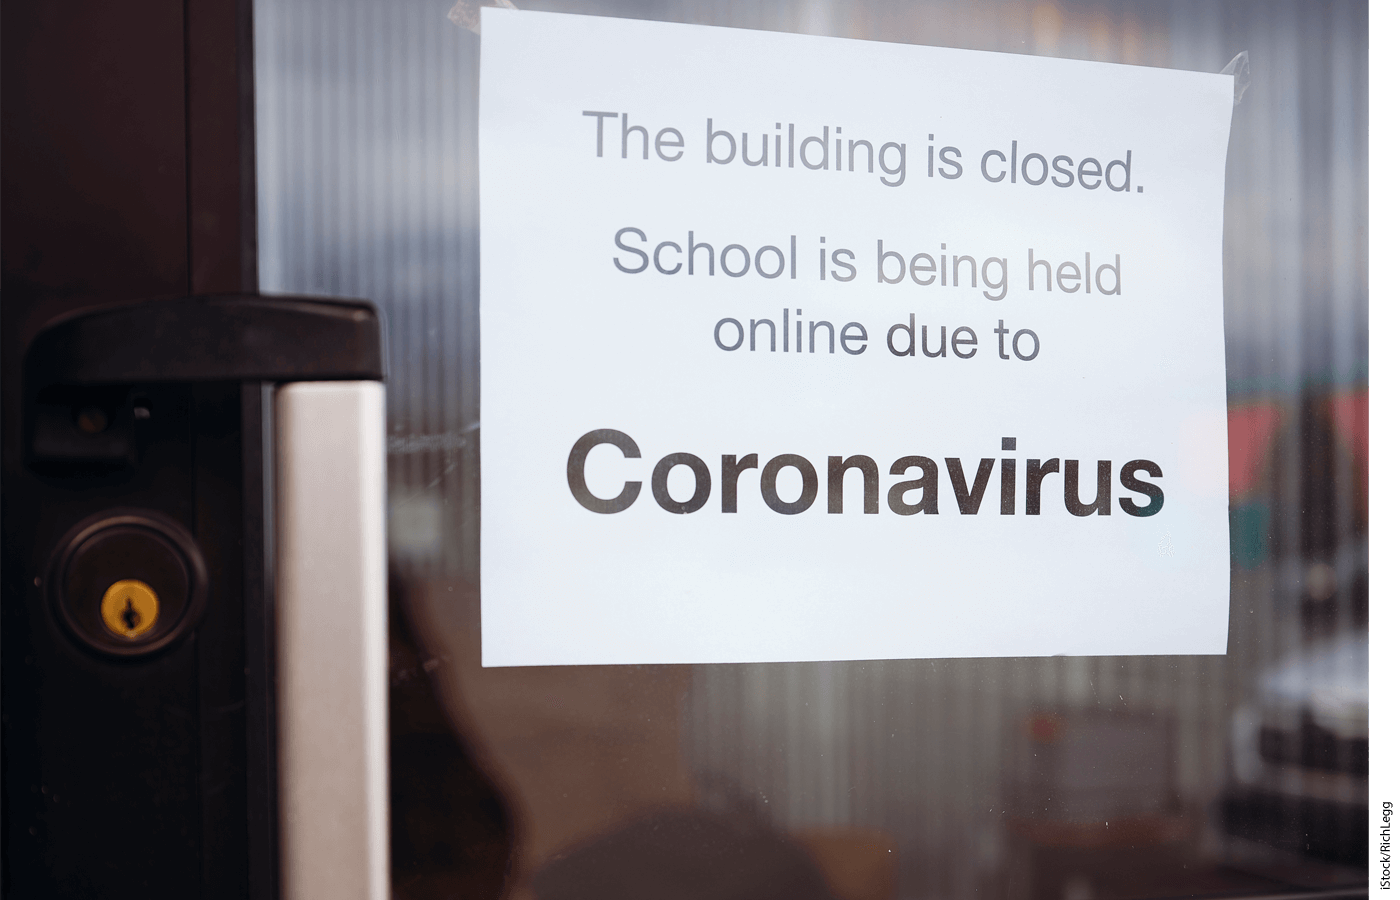 Image of a glass door with a sign that reads "The building is closed. School being held online due to Coronavirus."